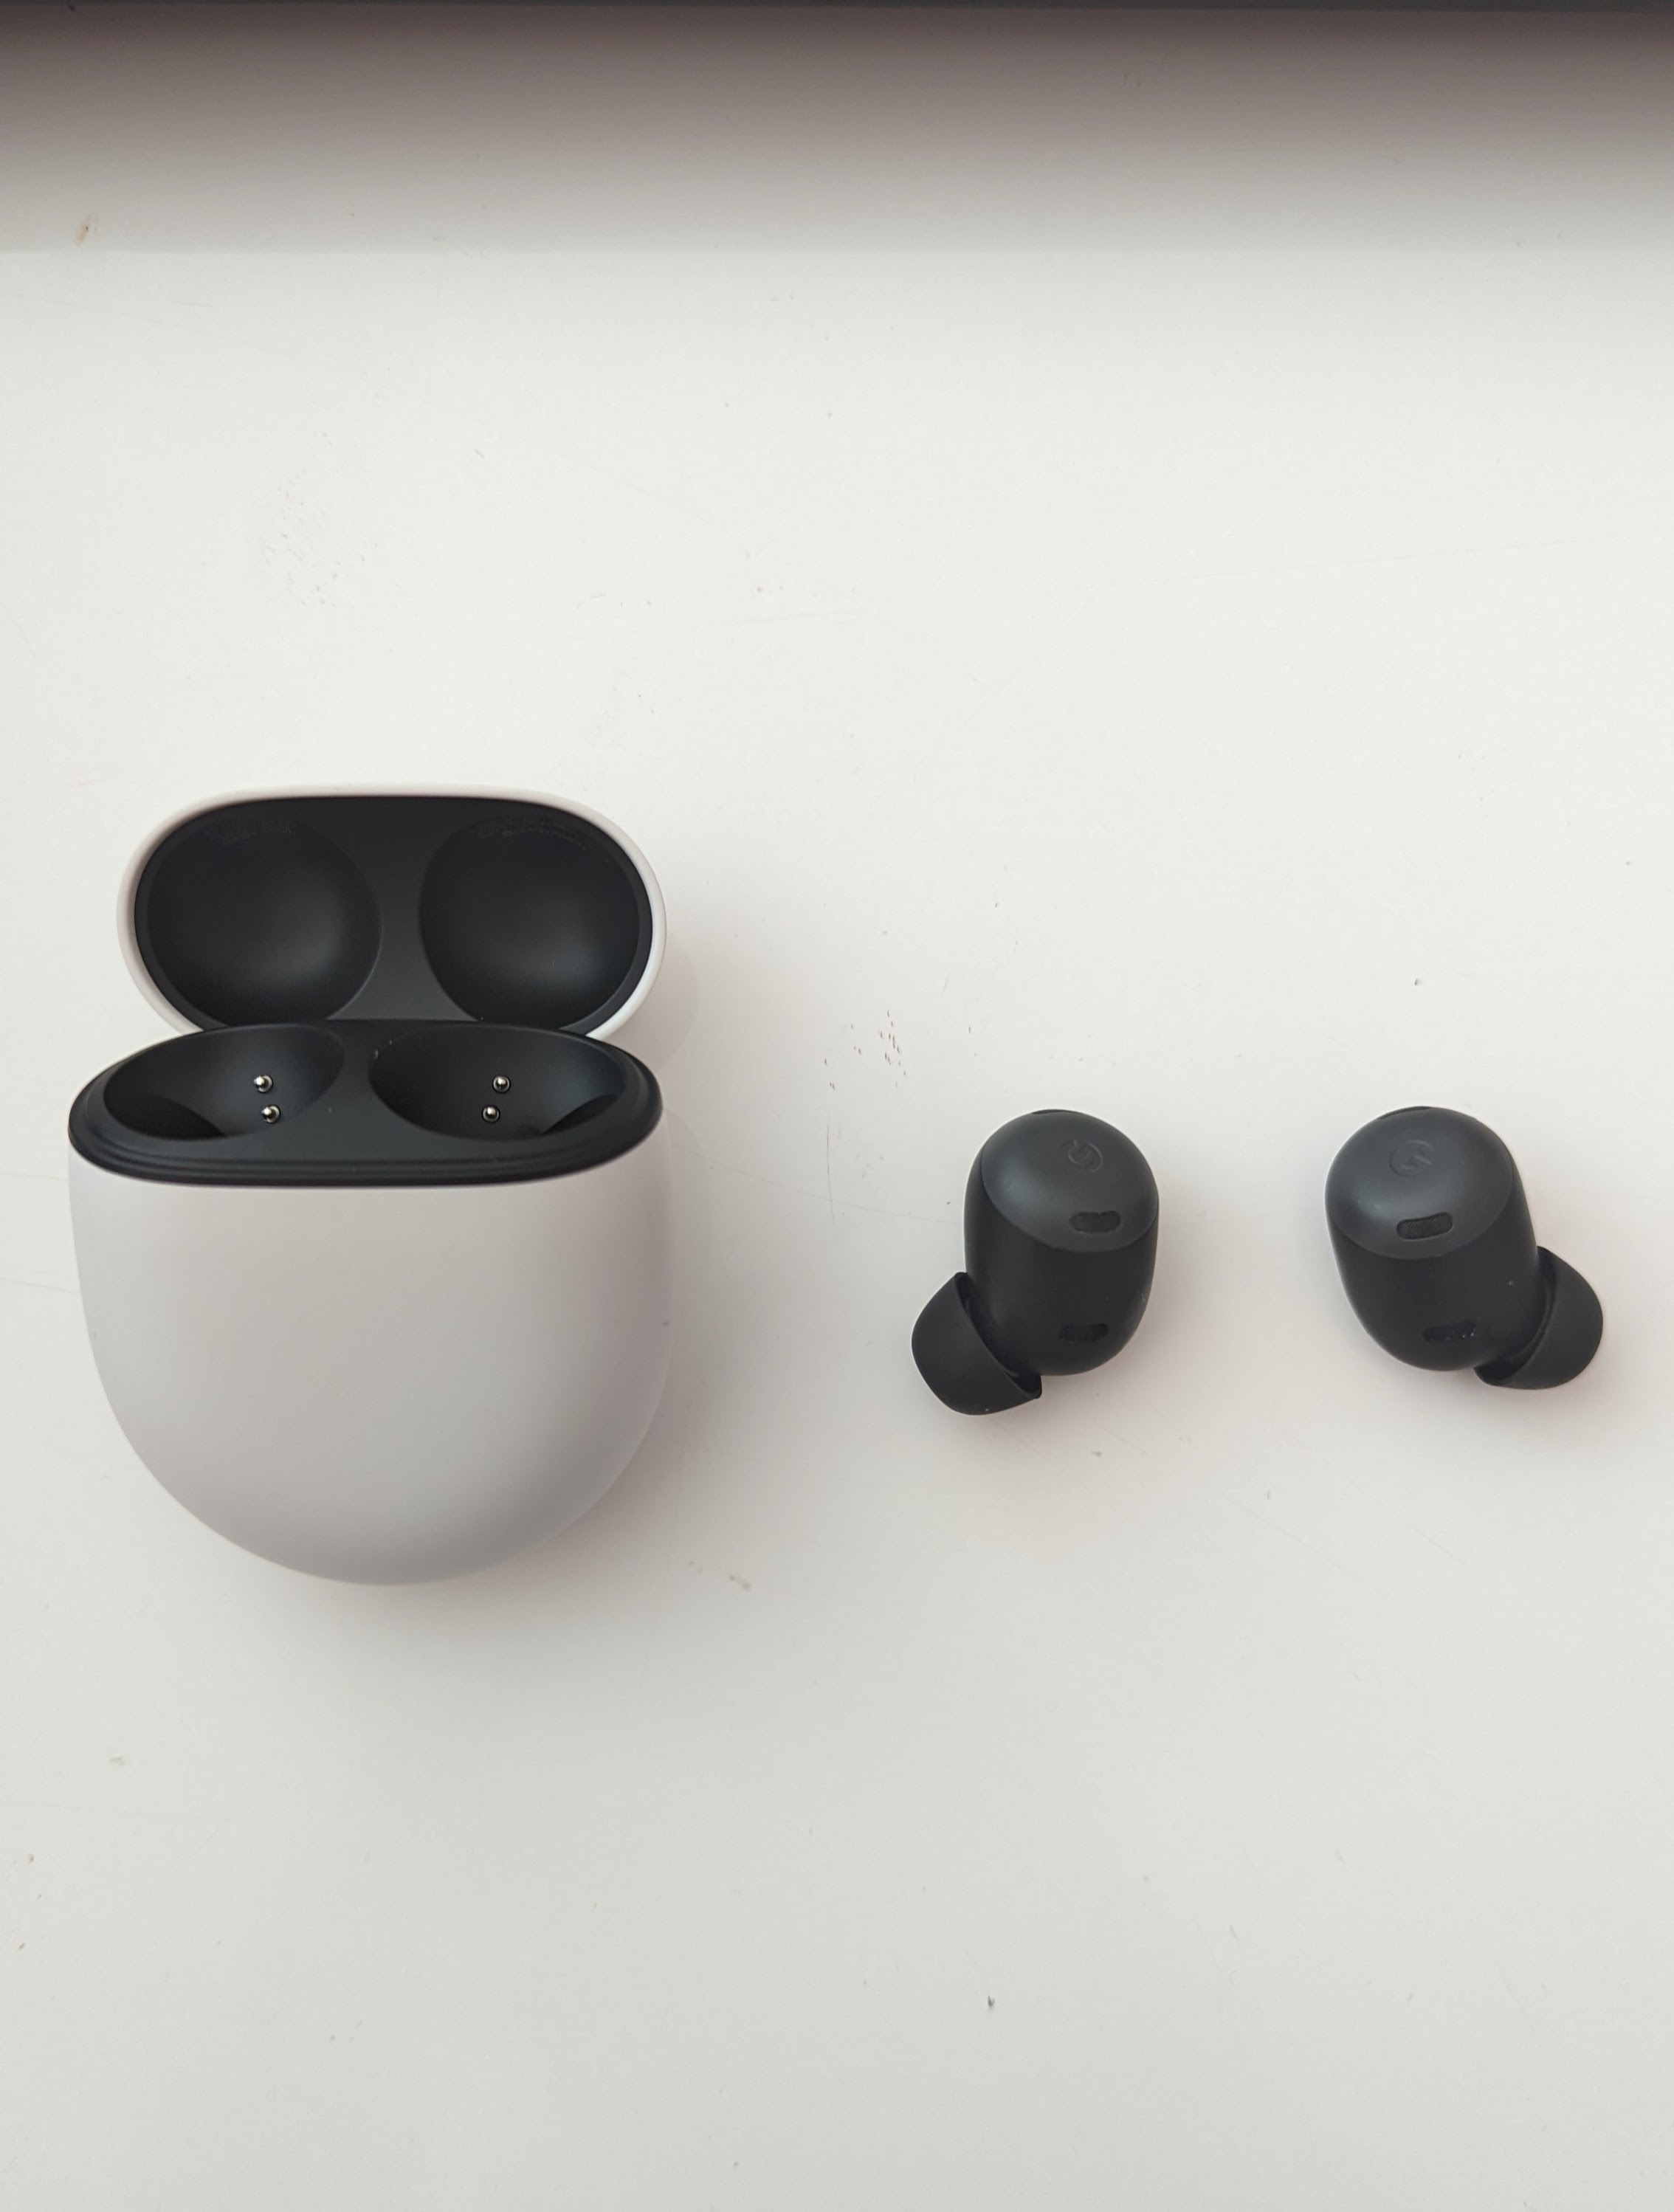 The Pixel Buds Pro case open with earbuds to the side.